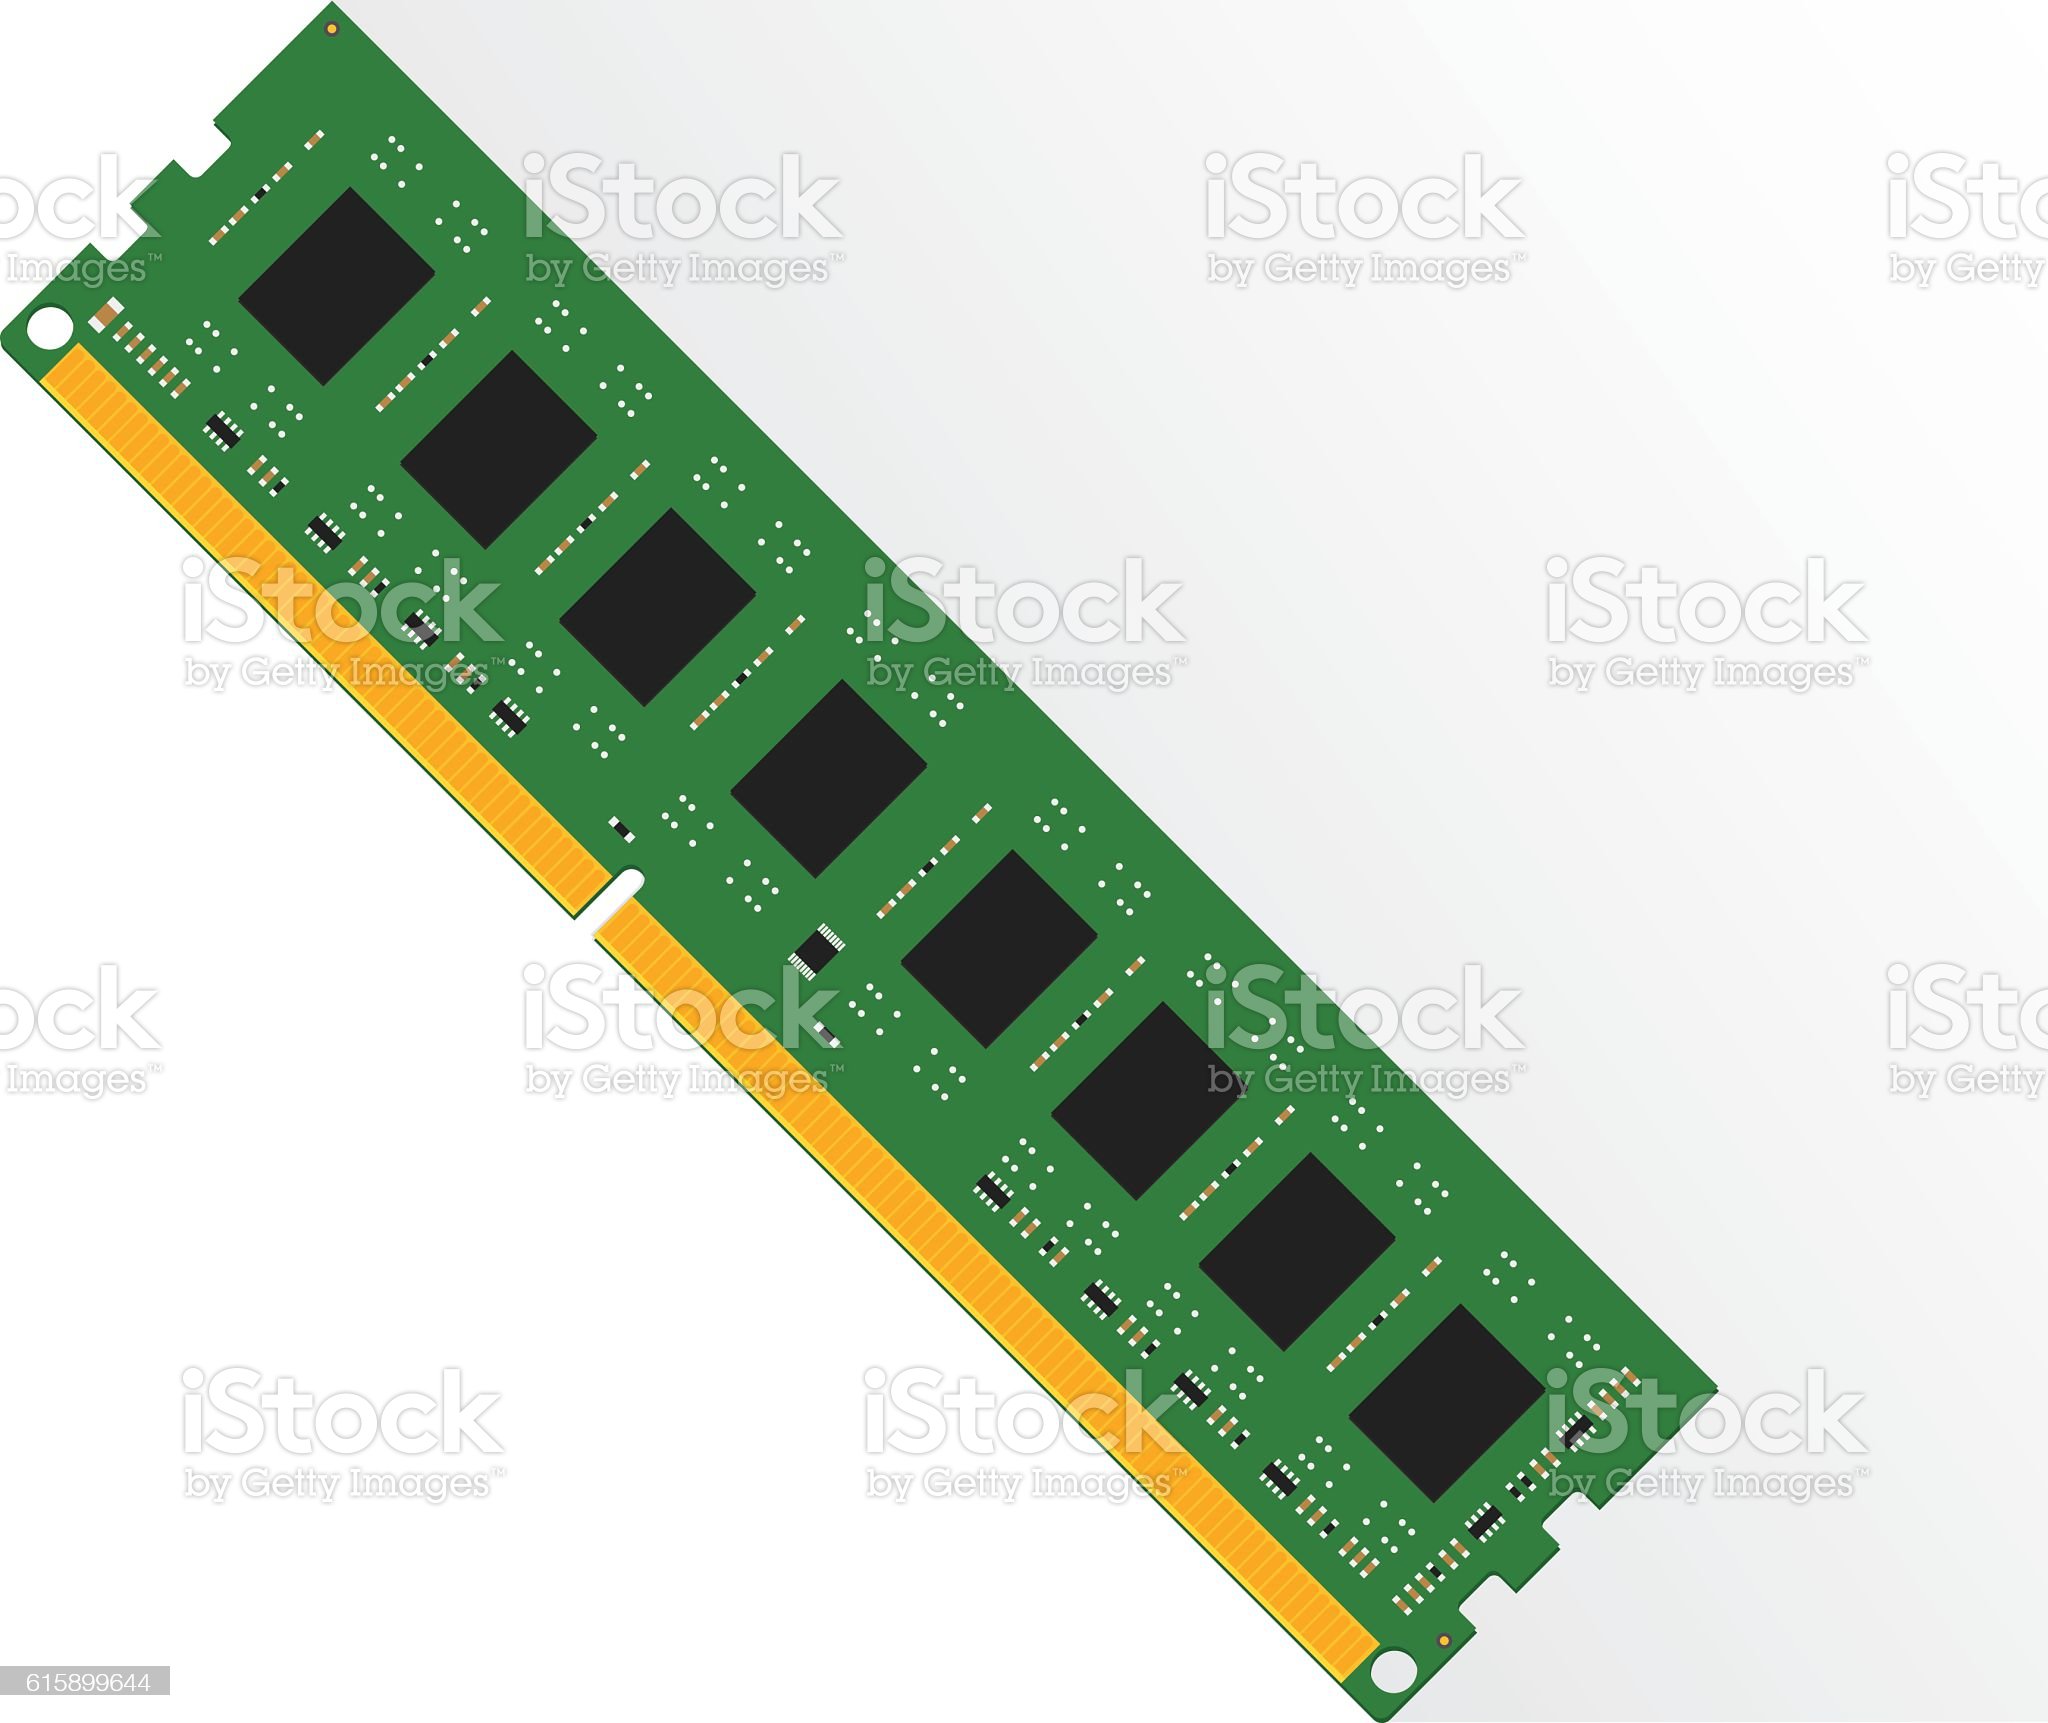 Random Access Memory Concept By Ram Labtop Stock Illustration Image Now